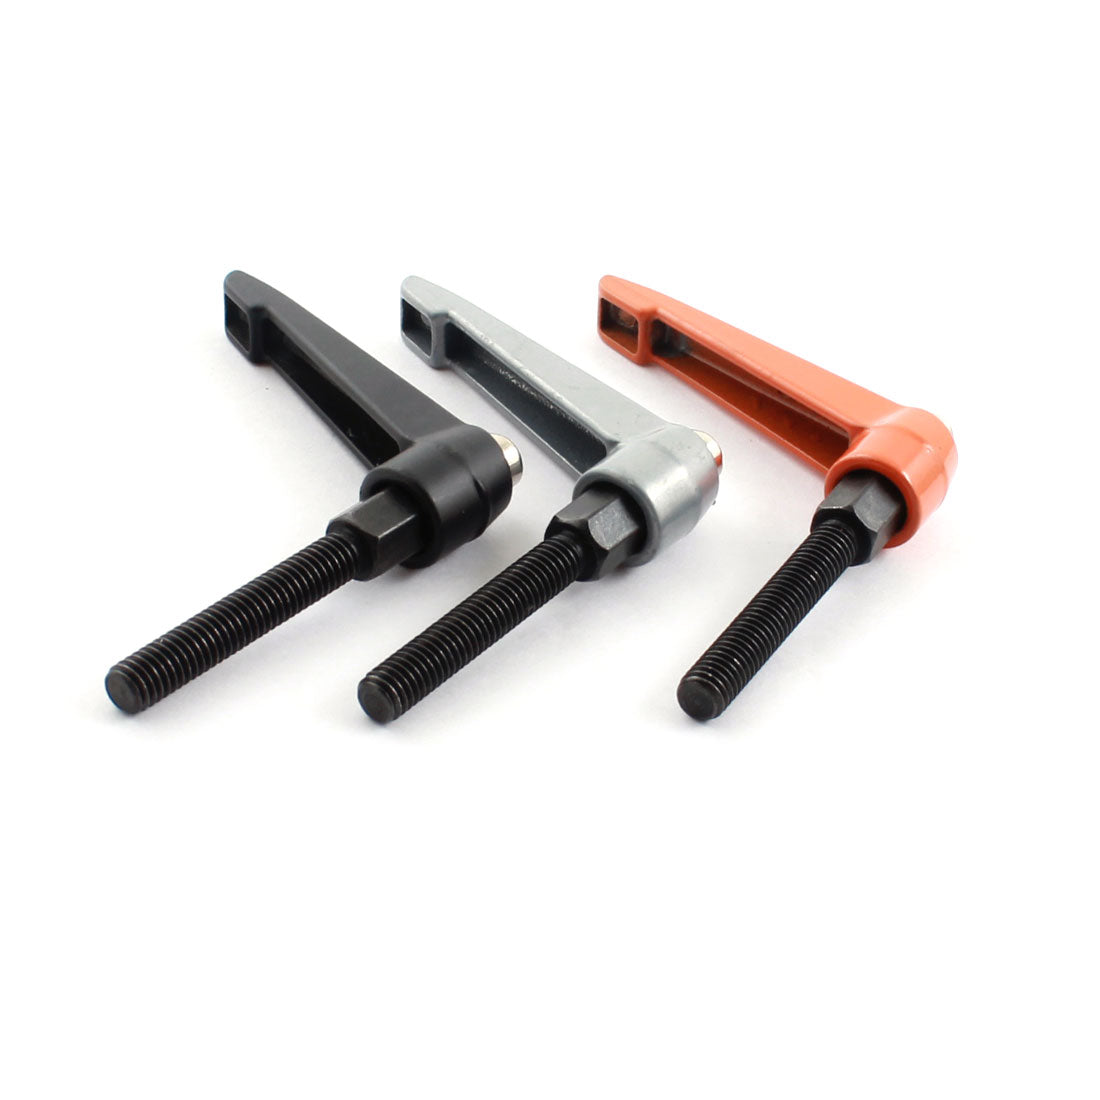 uxcell Uxcell 3PCS M6x35mm Male Thread 60mm Clamping Lever Adjustable Metal Knob Handle Grip Orange Black Silver Tone for Machinery